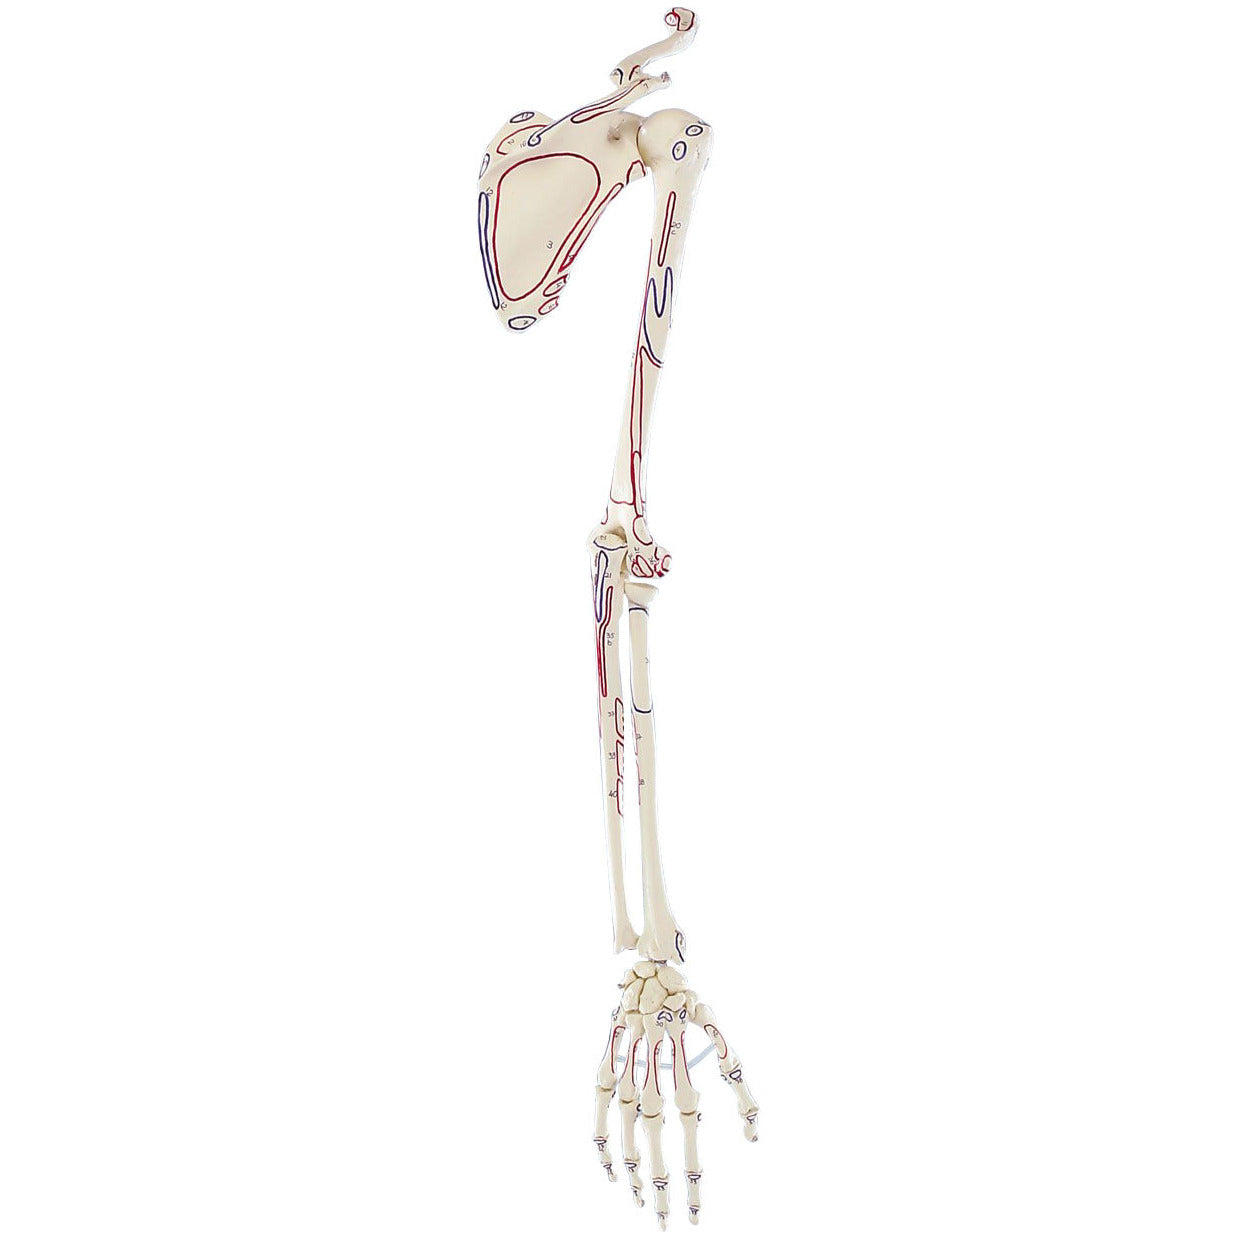 Skeleton of Arm with Shoulder Girdle and Muscle Marking